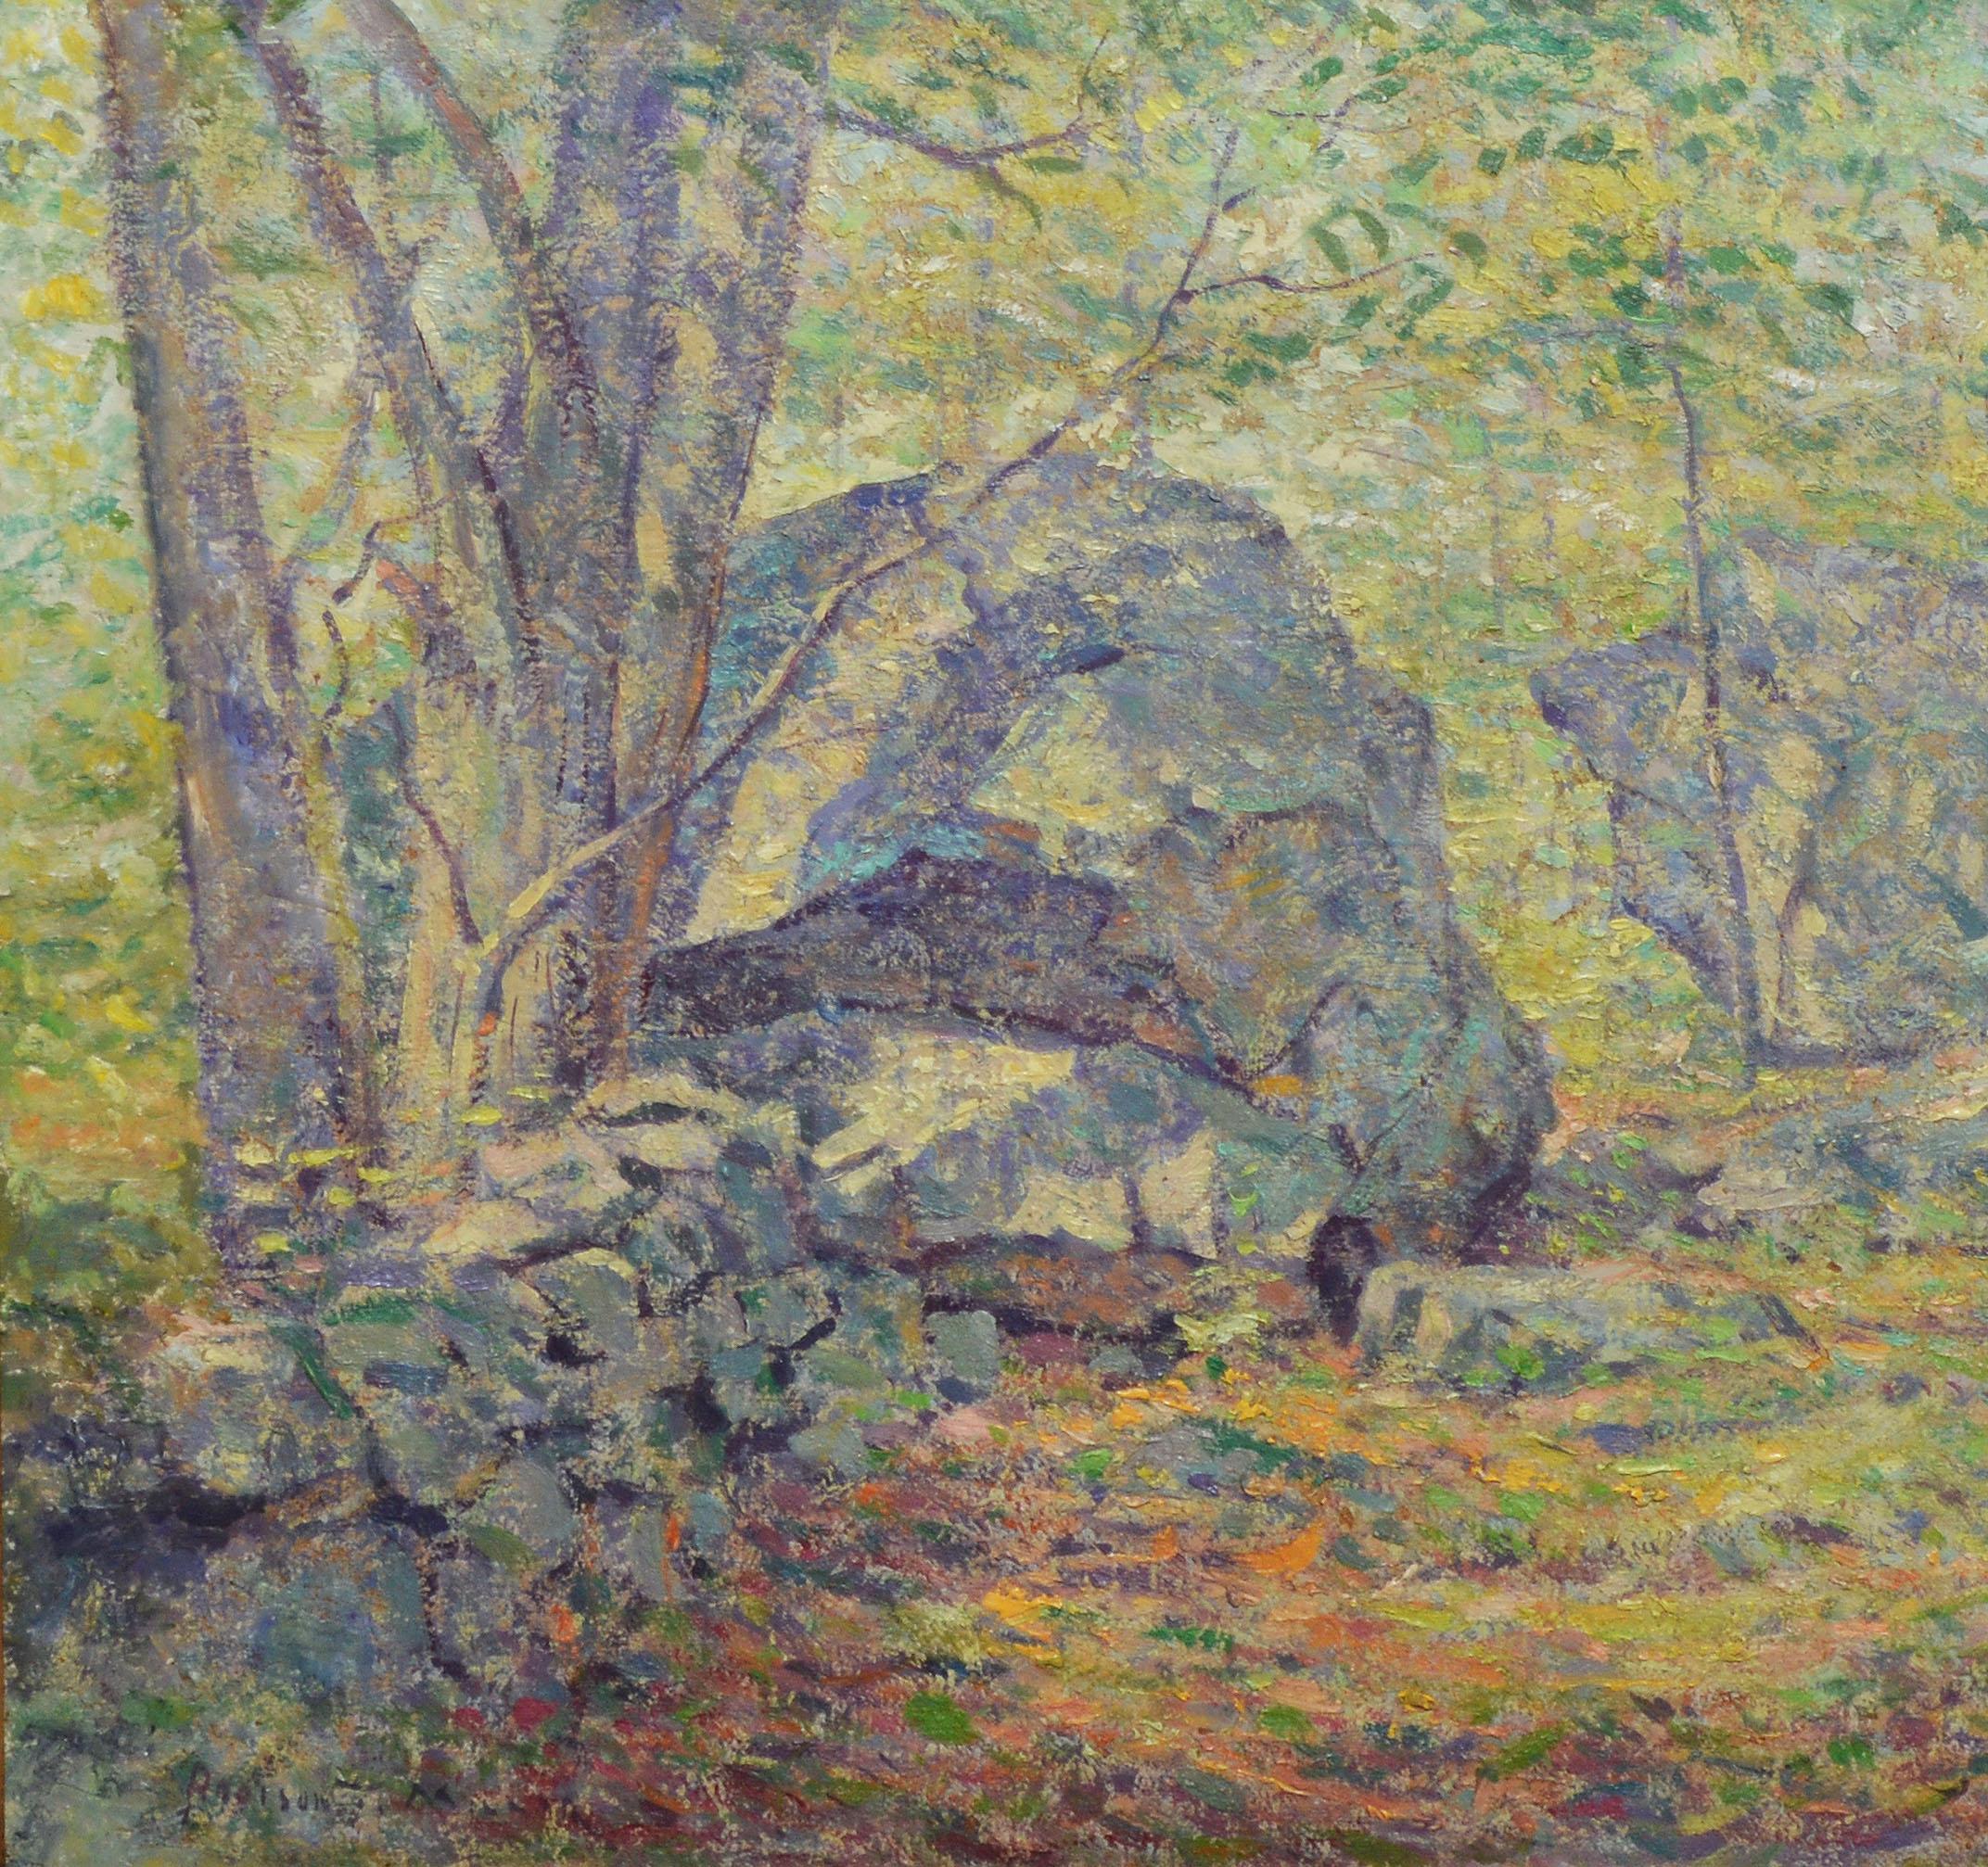 Antique American impressionist painting of a forest interior by Addison Thomas Millar  (1860 - 1913).  Oil on canvas, circa 1900.  Signed.  Displayed in a period giltwood frame.  Image, 24